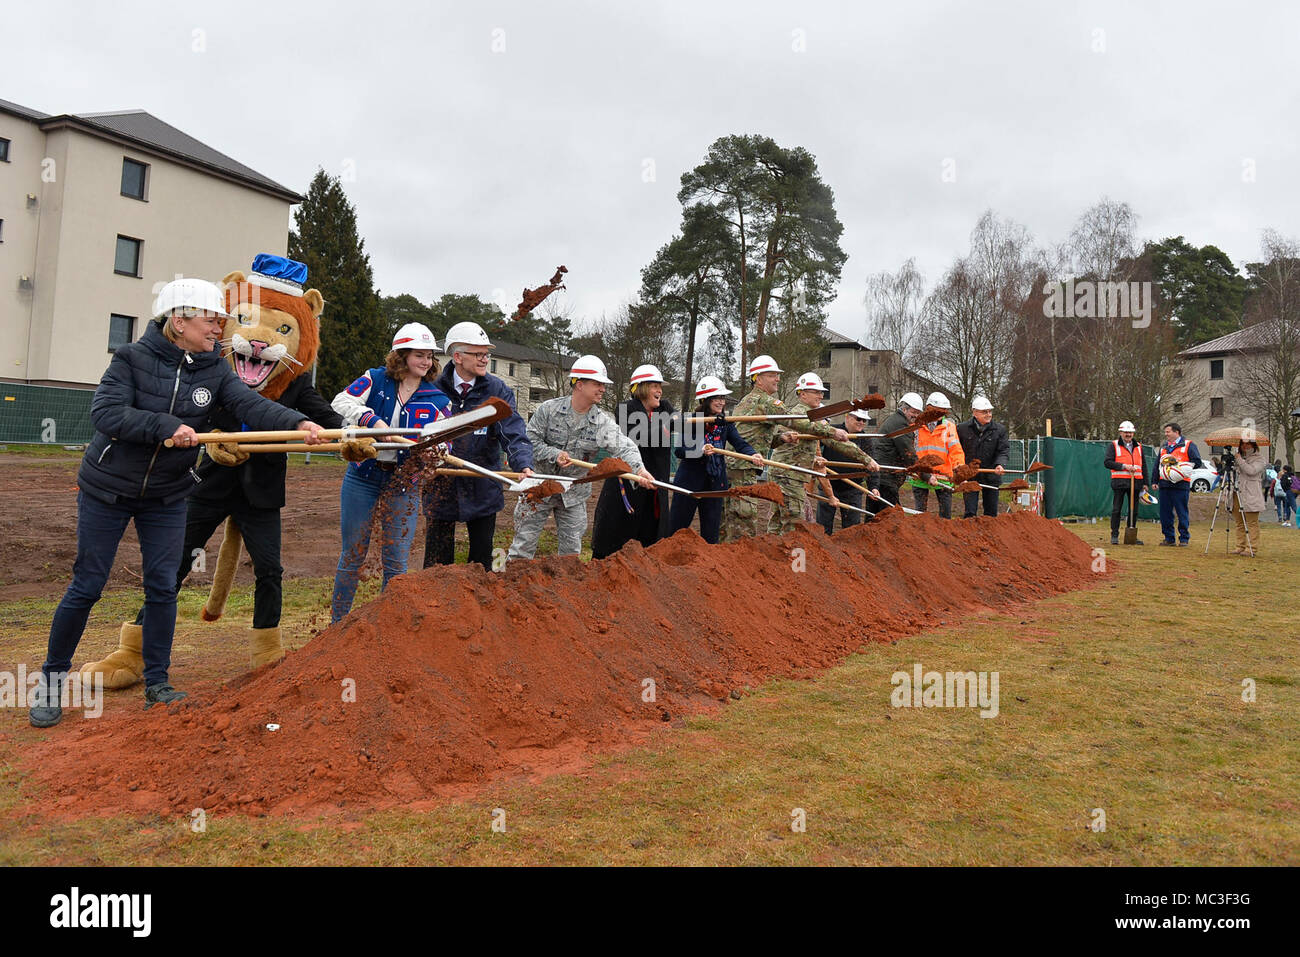 Military and civilian officials conduct a groundbreaking ceremony for a new school building on Ramstein Air Base, Germany, March 28, 2018. The Kaiserslautern Military Community has pushed to replace its old school buildings with futuristic 21st century educational facilities, which are characterized by student-centeredness, energy efficiency, and flexibility to accommodate multiple learning styles. Stock Photo